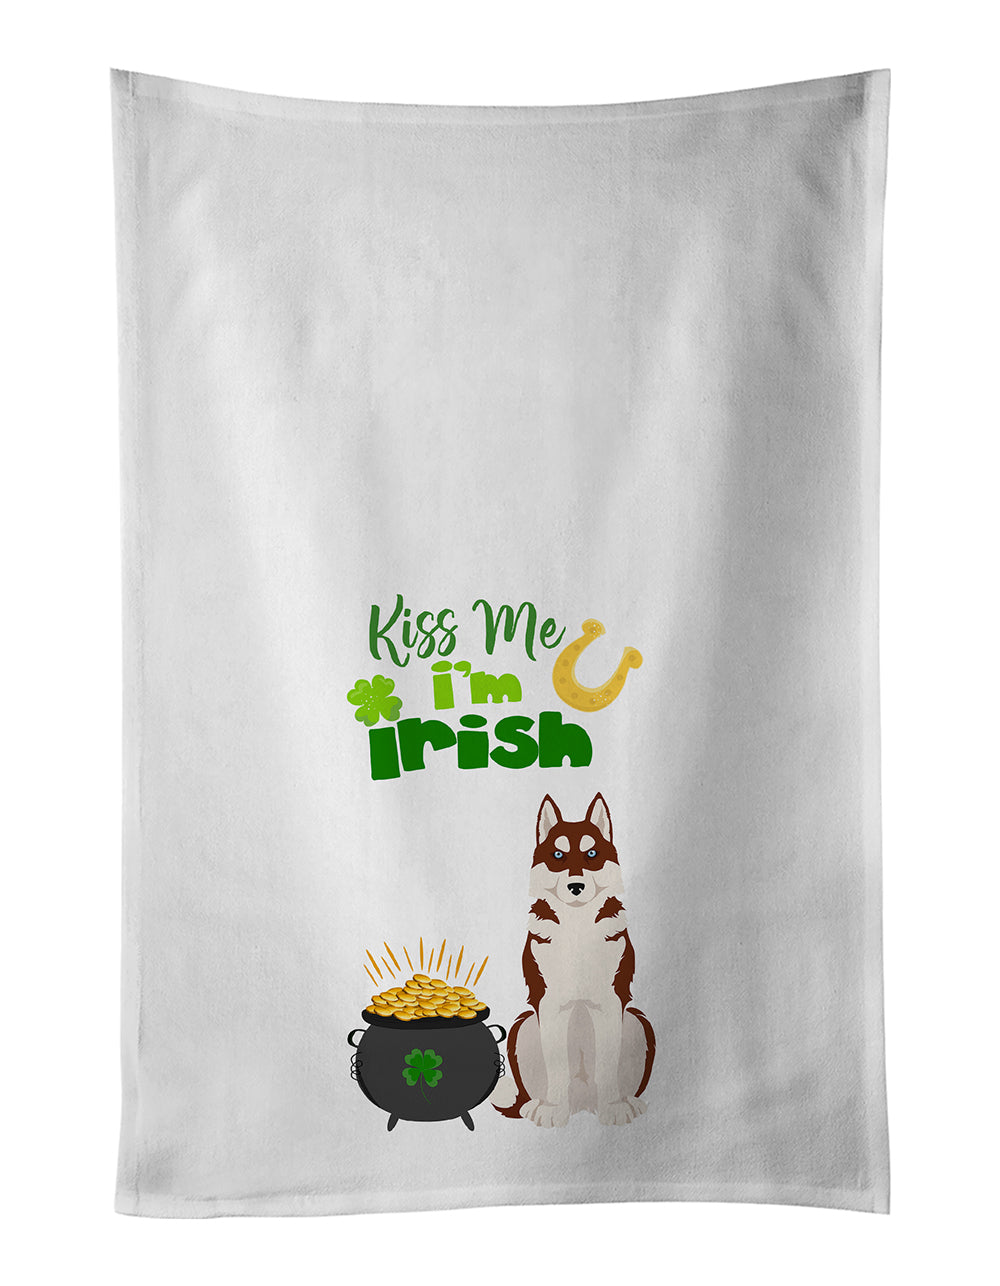 Buy this Red Siberian Husky St. Patrick's Day White Kitchen Towel Set of 2 Dish Towels